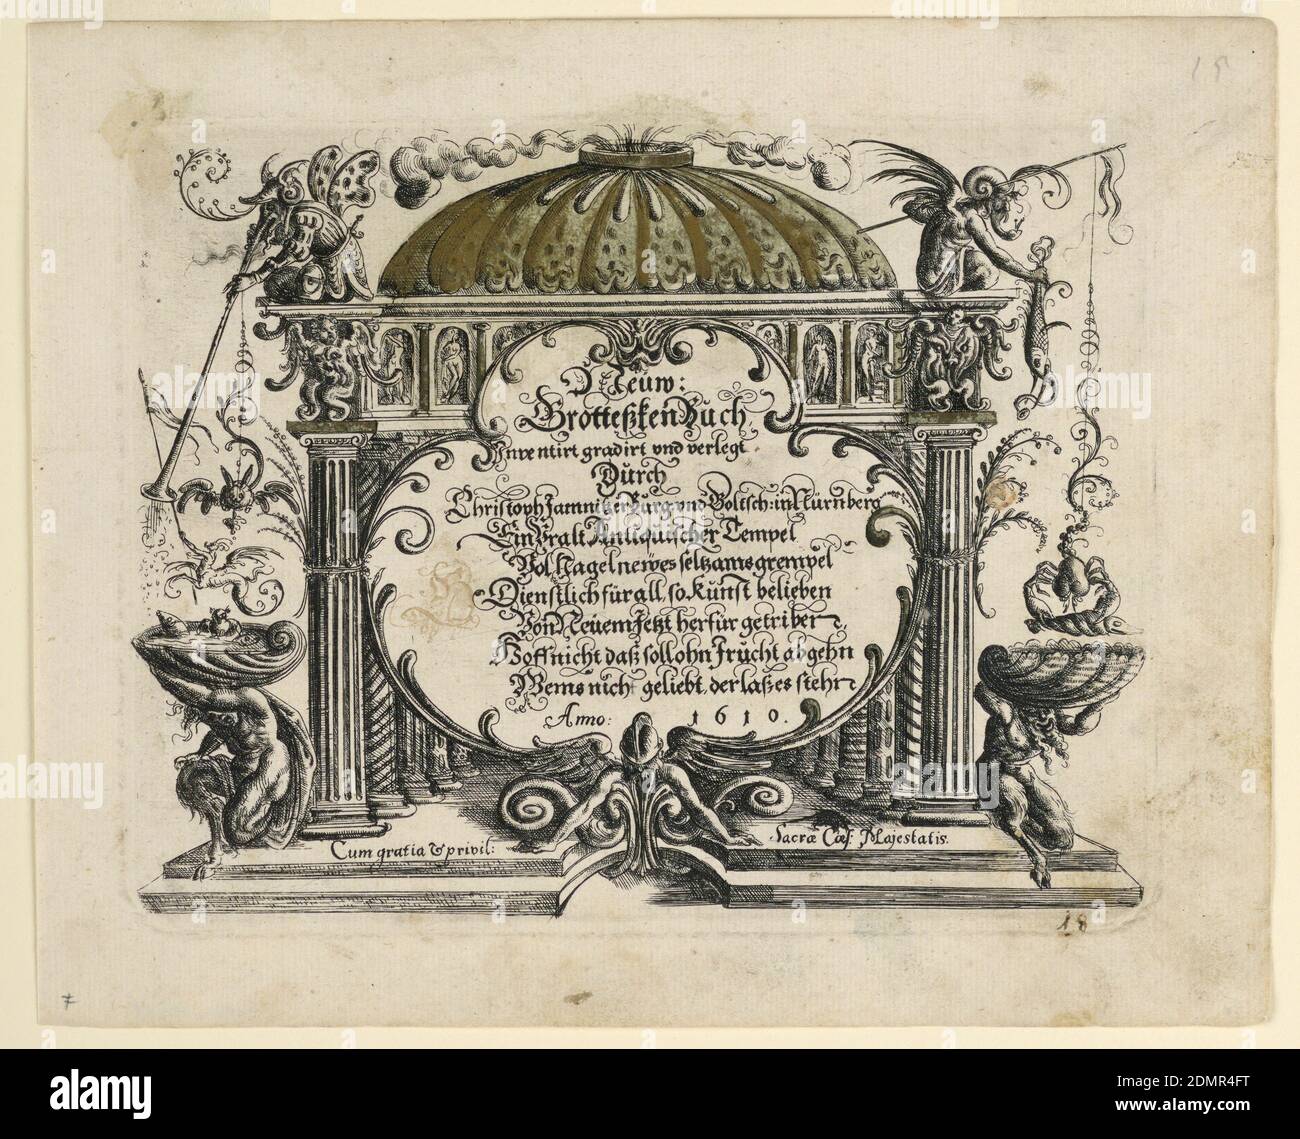 Title page, from Neüw Grotteßken Buch (New Grotesque Book), Christoph  Jamnitzer, German, 1563 - 1618, Engraving on laid paper, Within an  eleborate frame resembling a domed building with columns is the suite